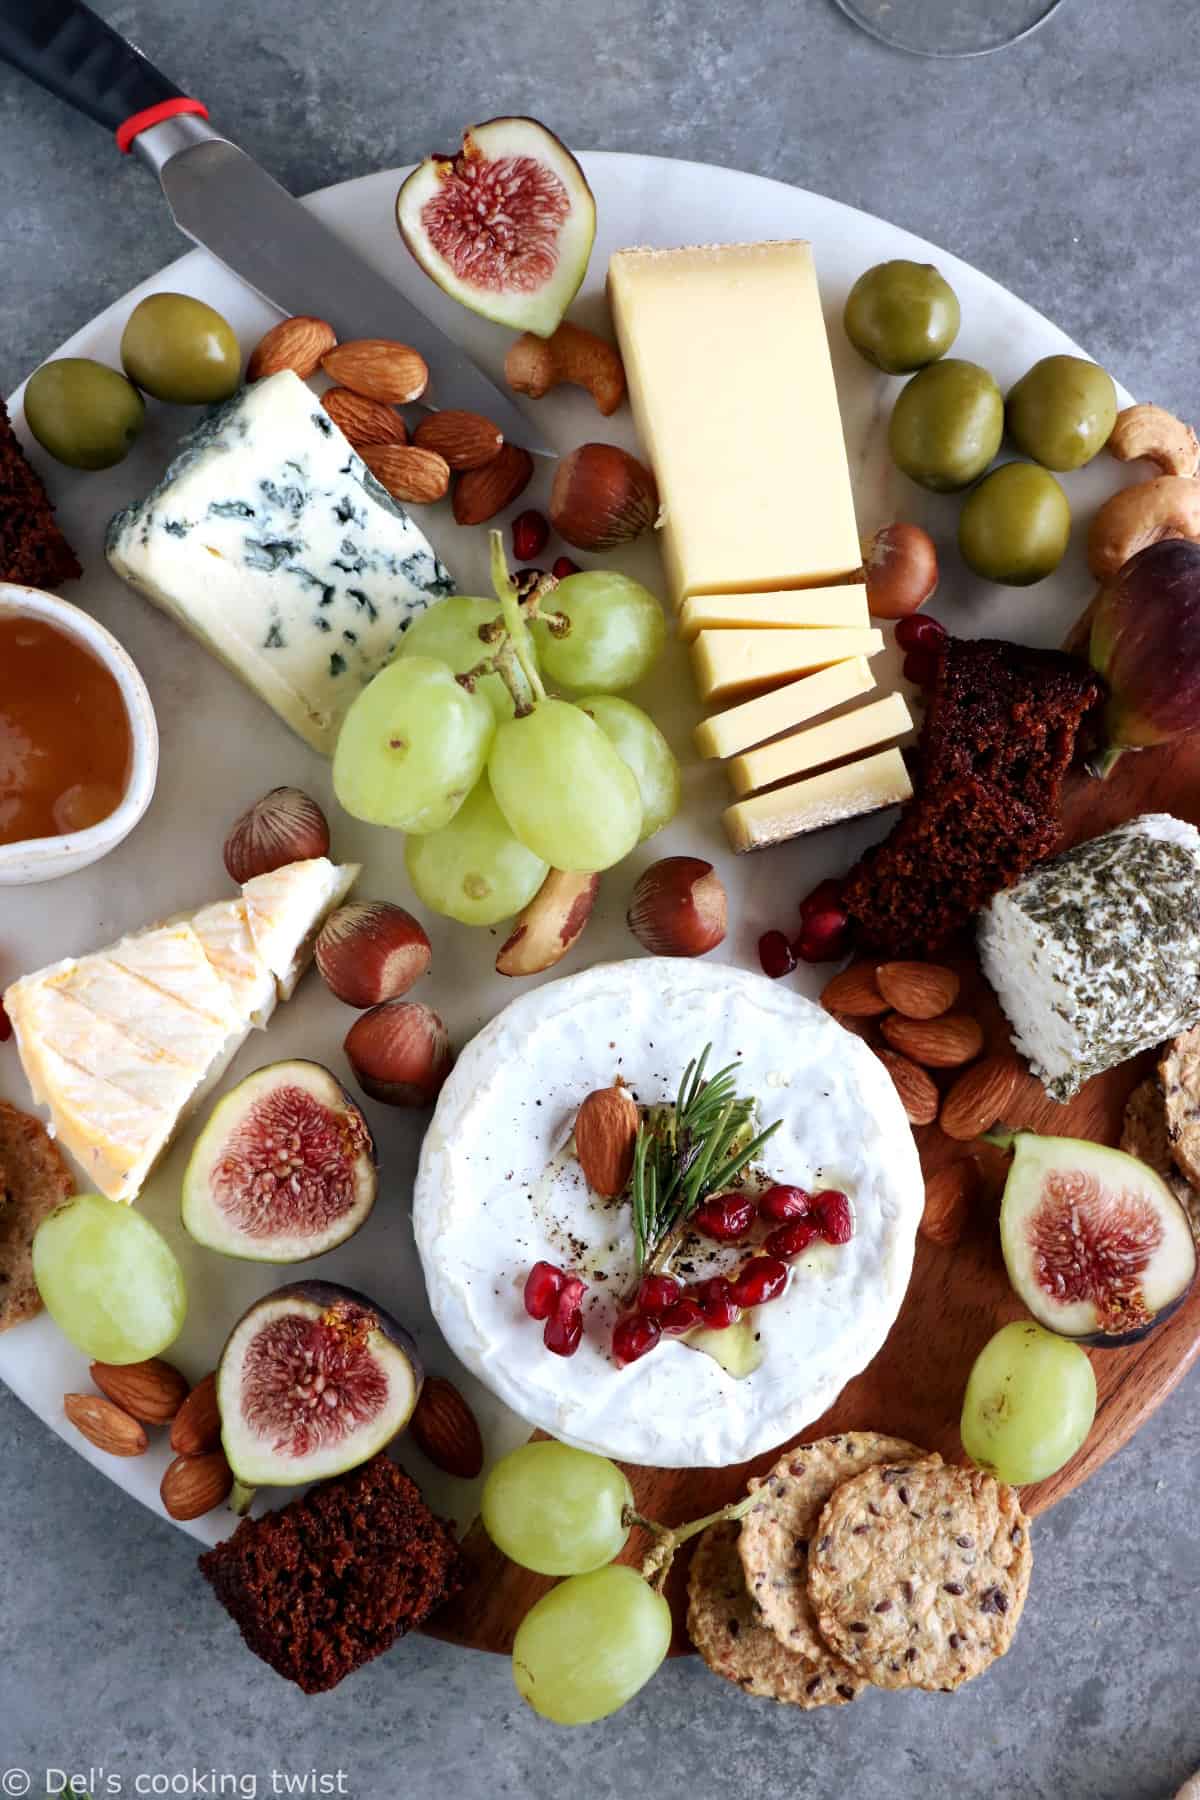 How to Make a Cheese Board - The Cheese Knees